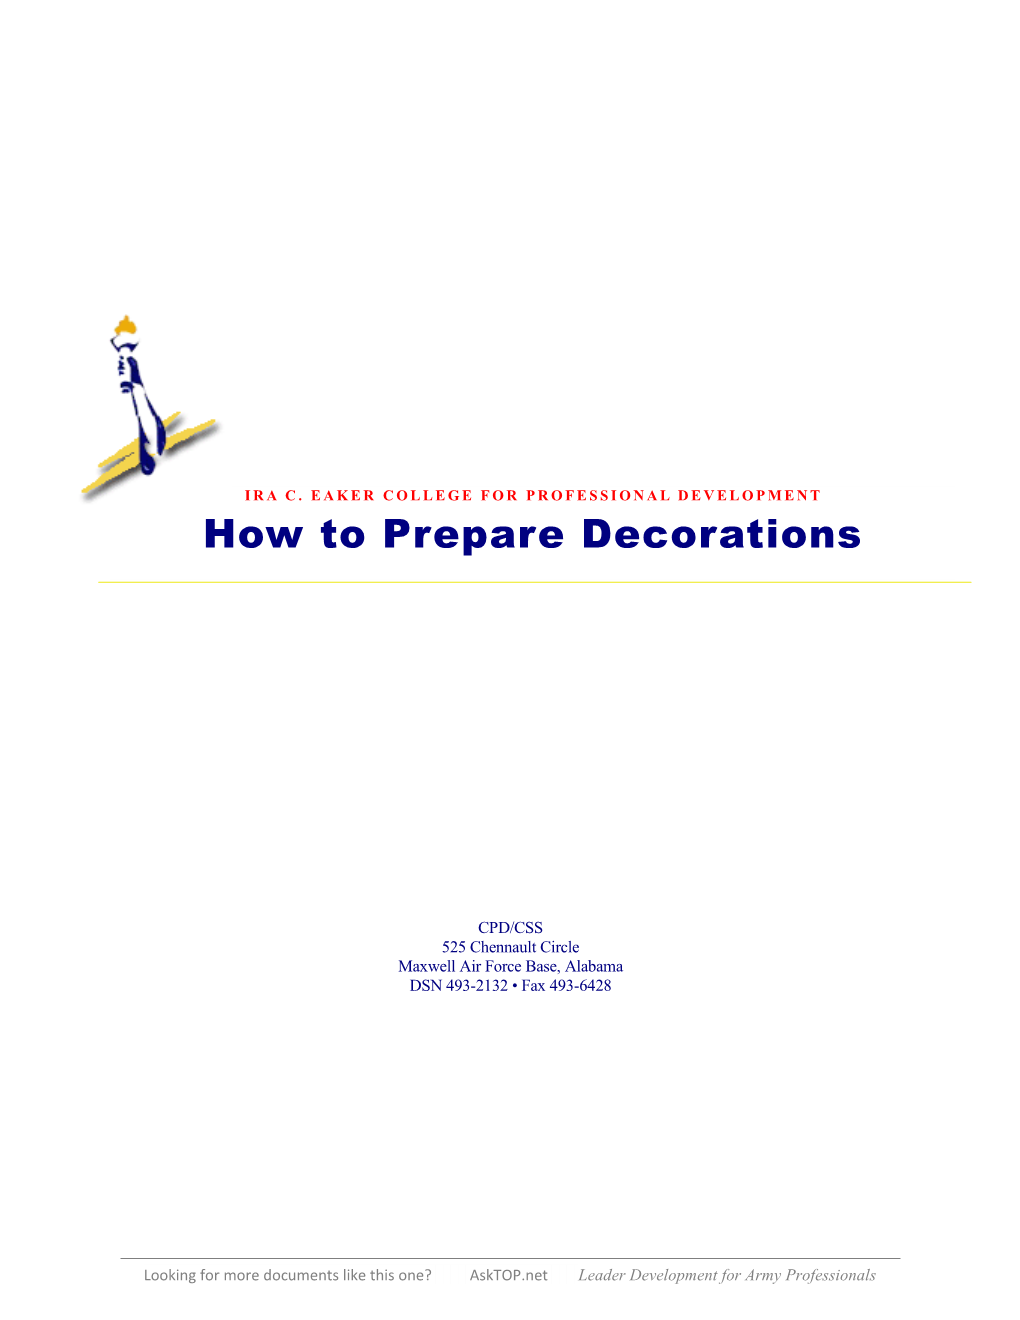 Maxwell Air Force Base Decoration Guide